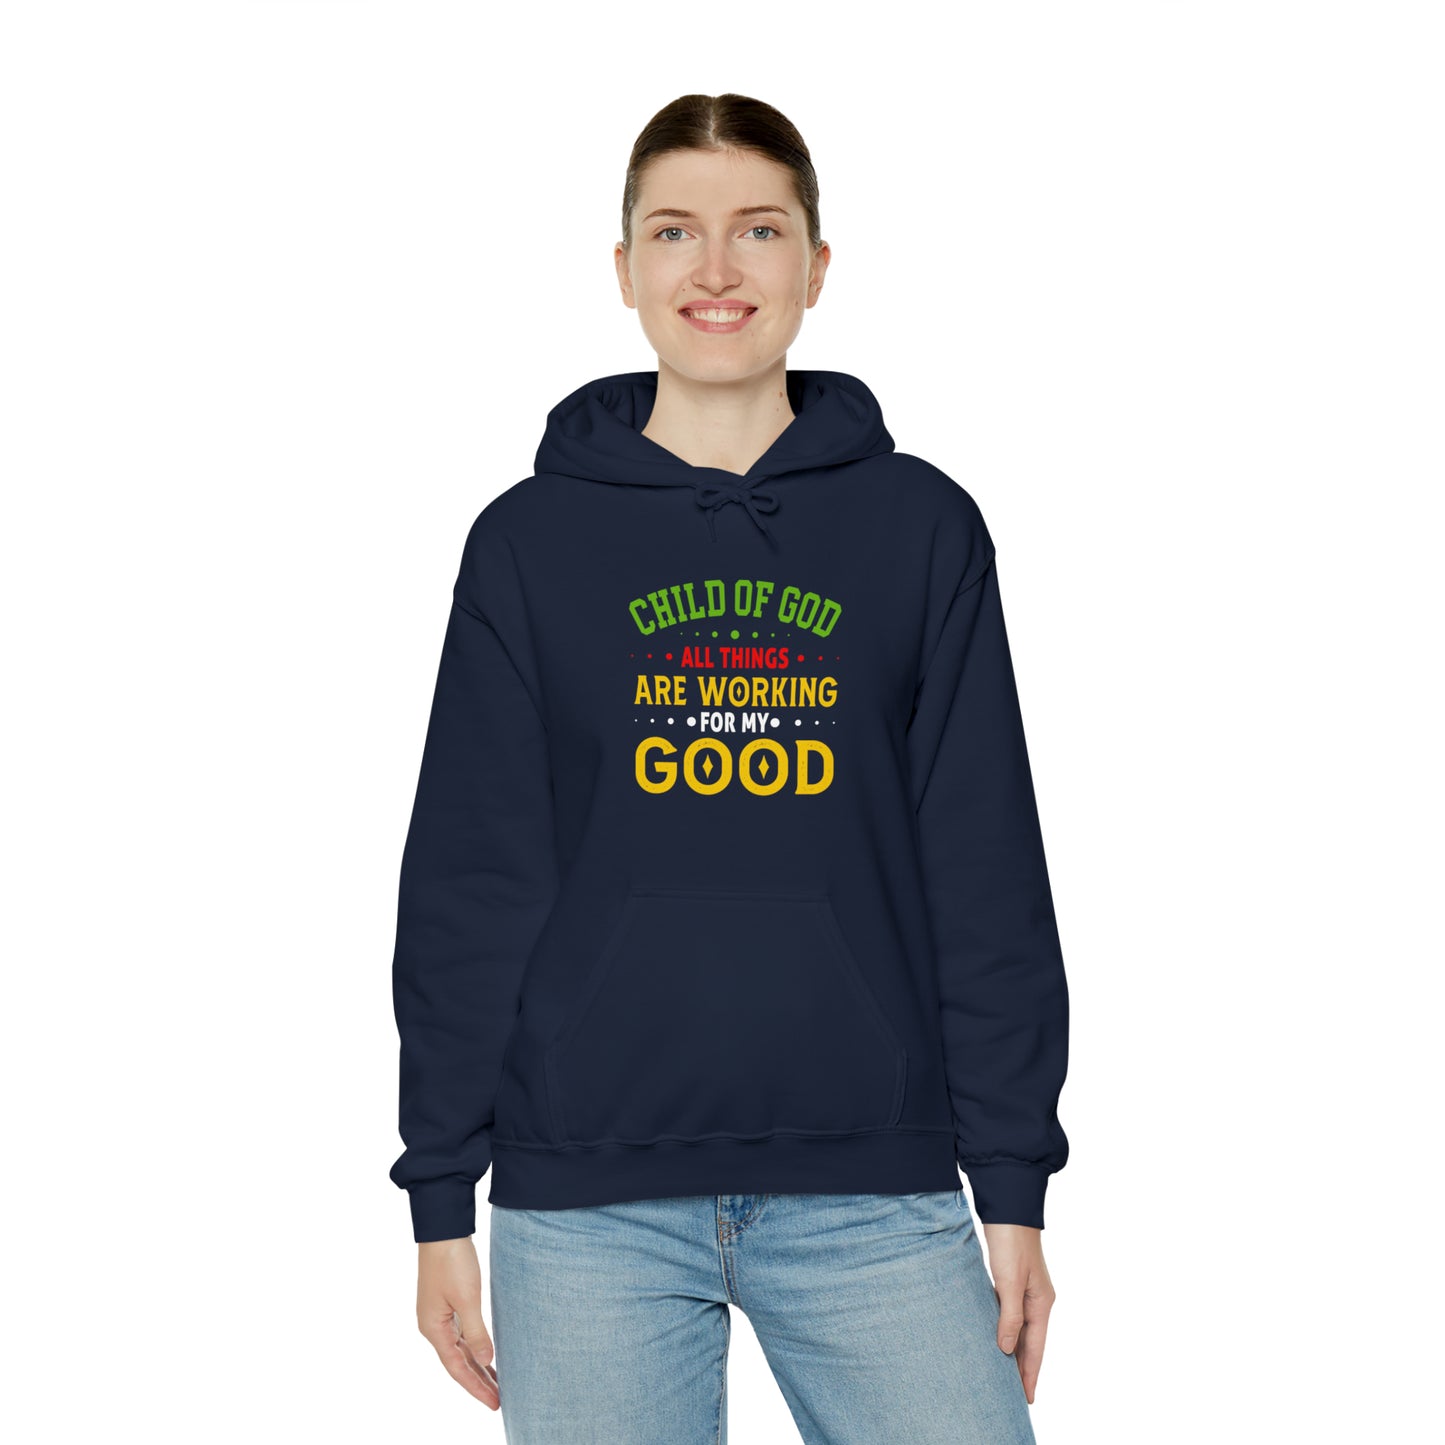 Child Of God All Things Are Working For My Good Christian Unisex Pull On Hooded sweatshirt Printify